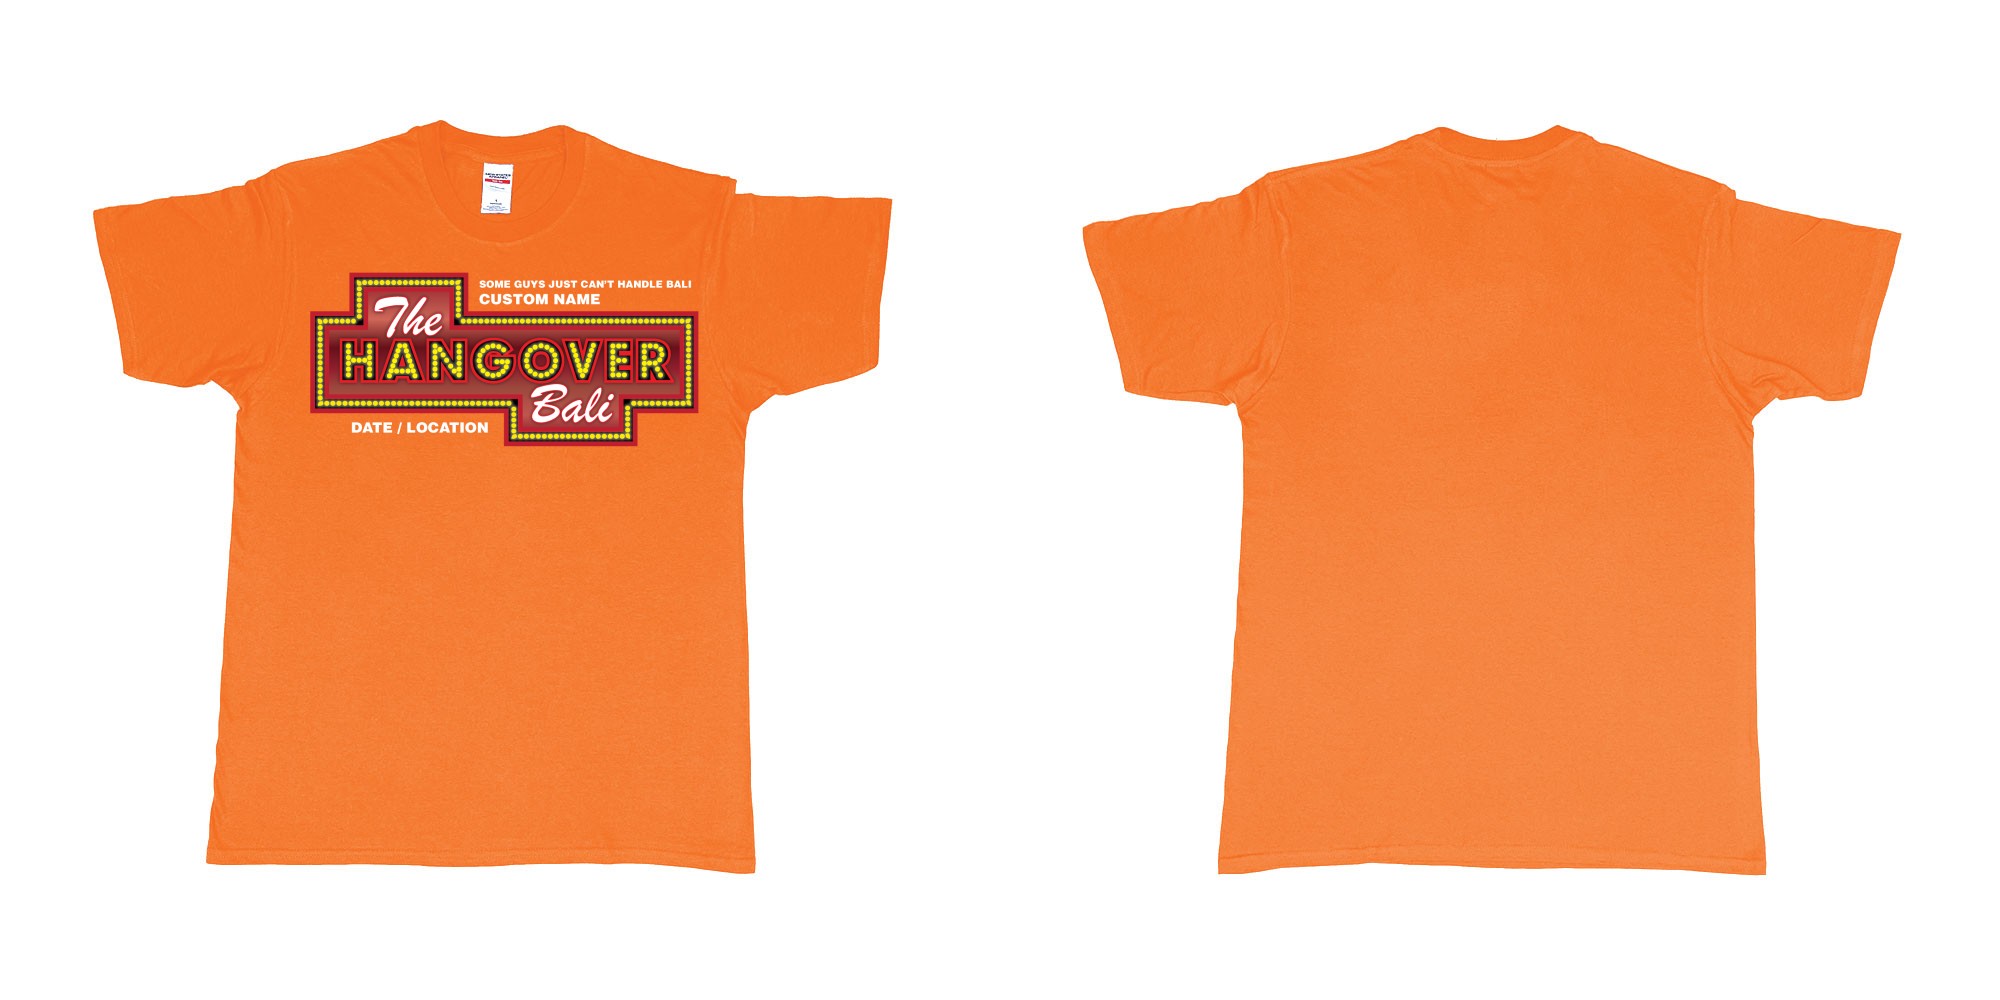 Custom tshirt design the hangover bali tour custom printing own name in fabric color orange choice your own text made in Bali by The Pirate Way